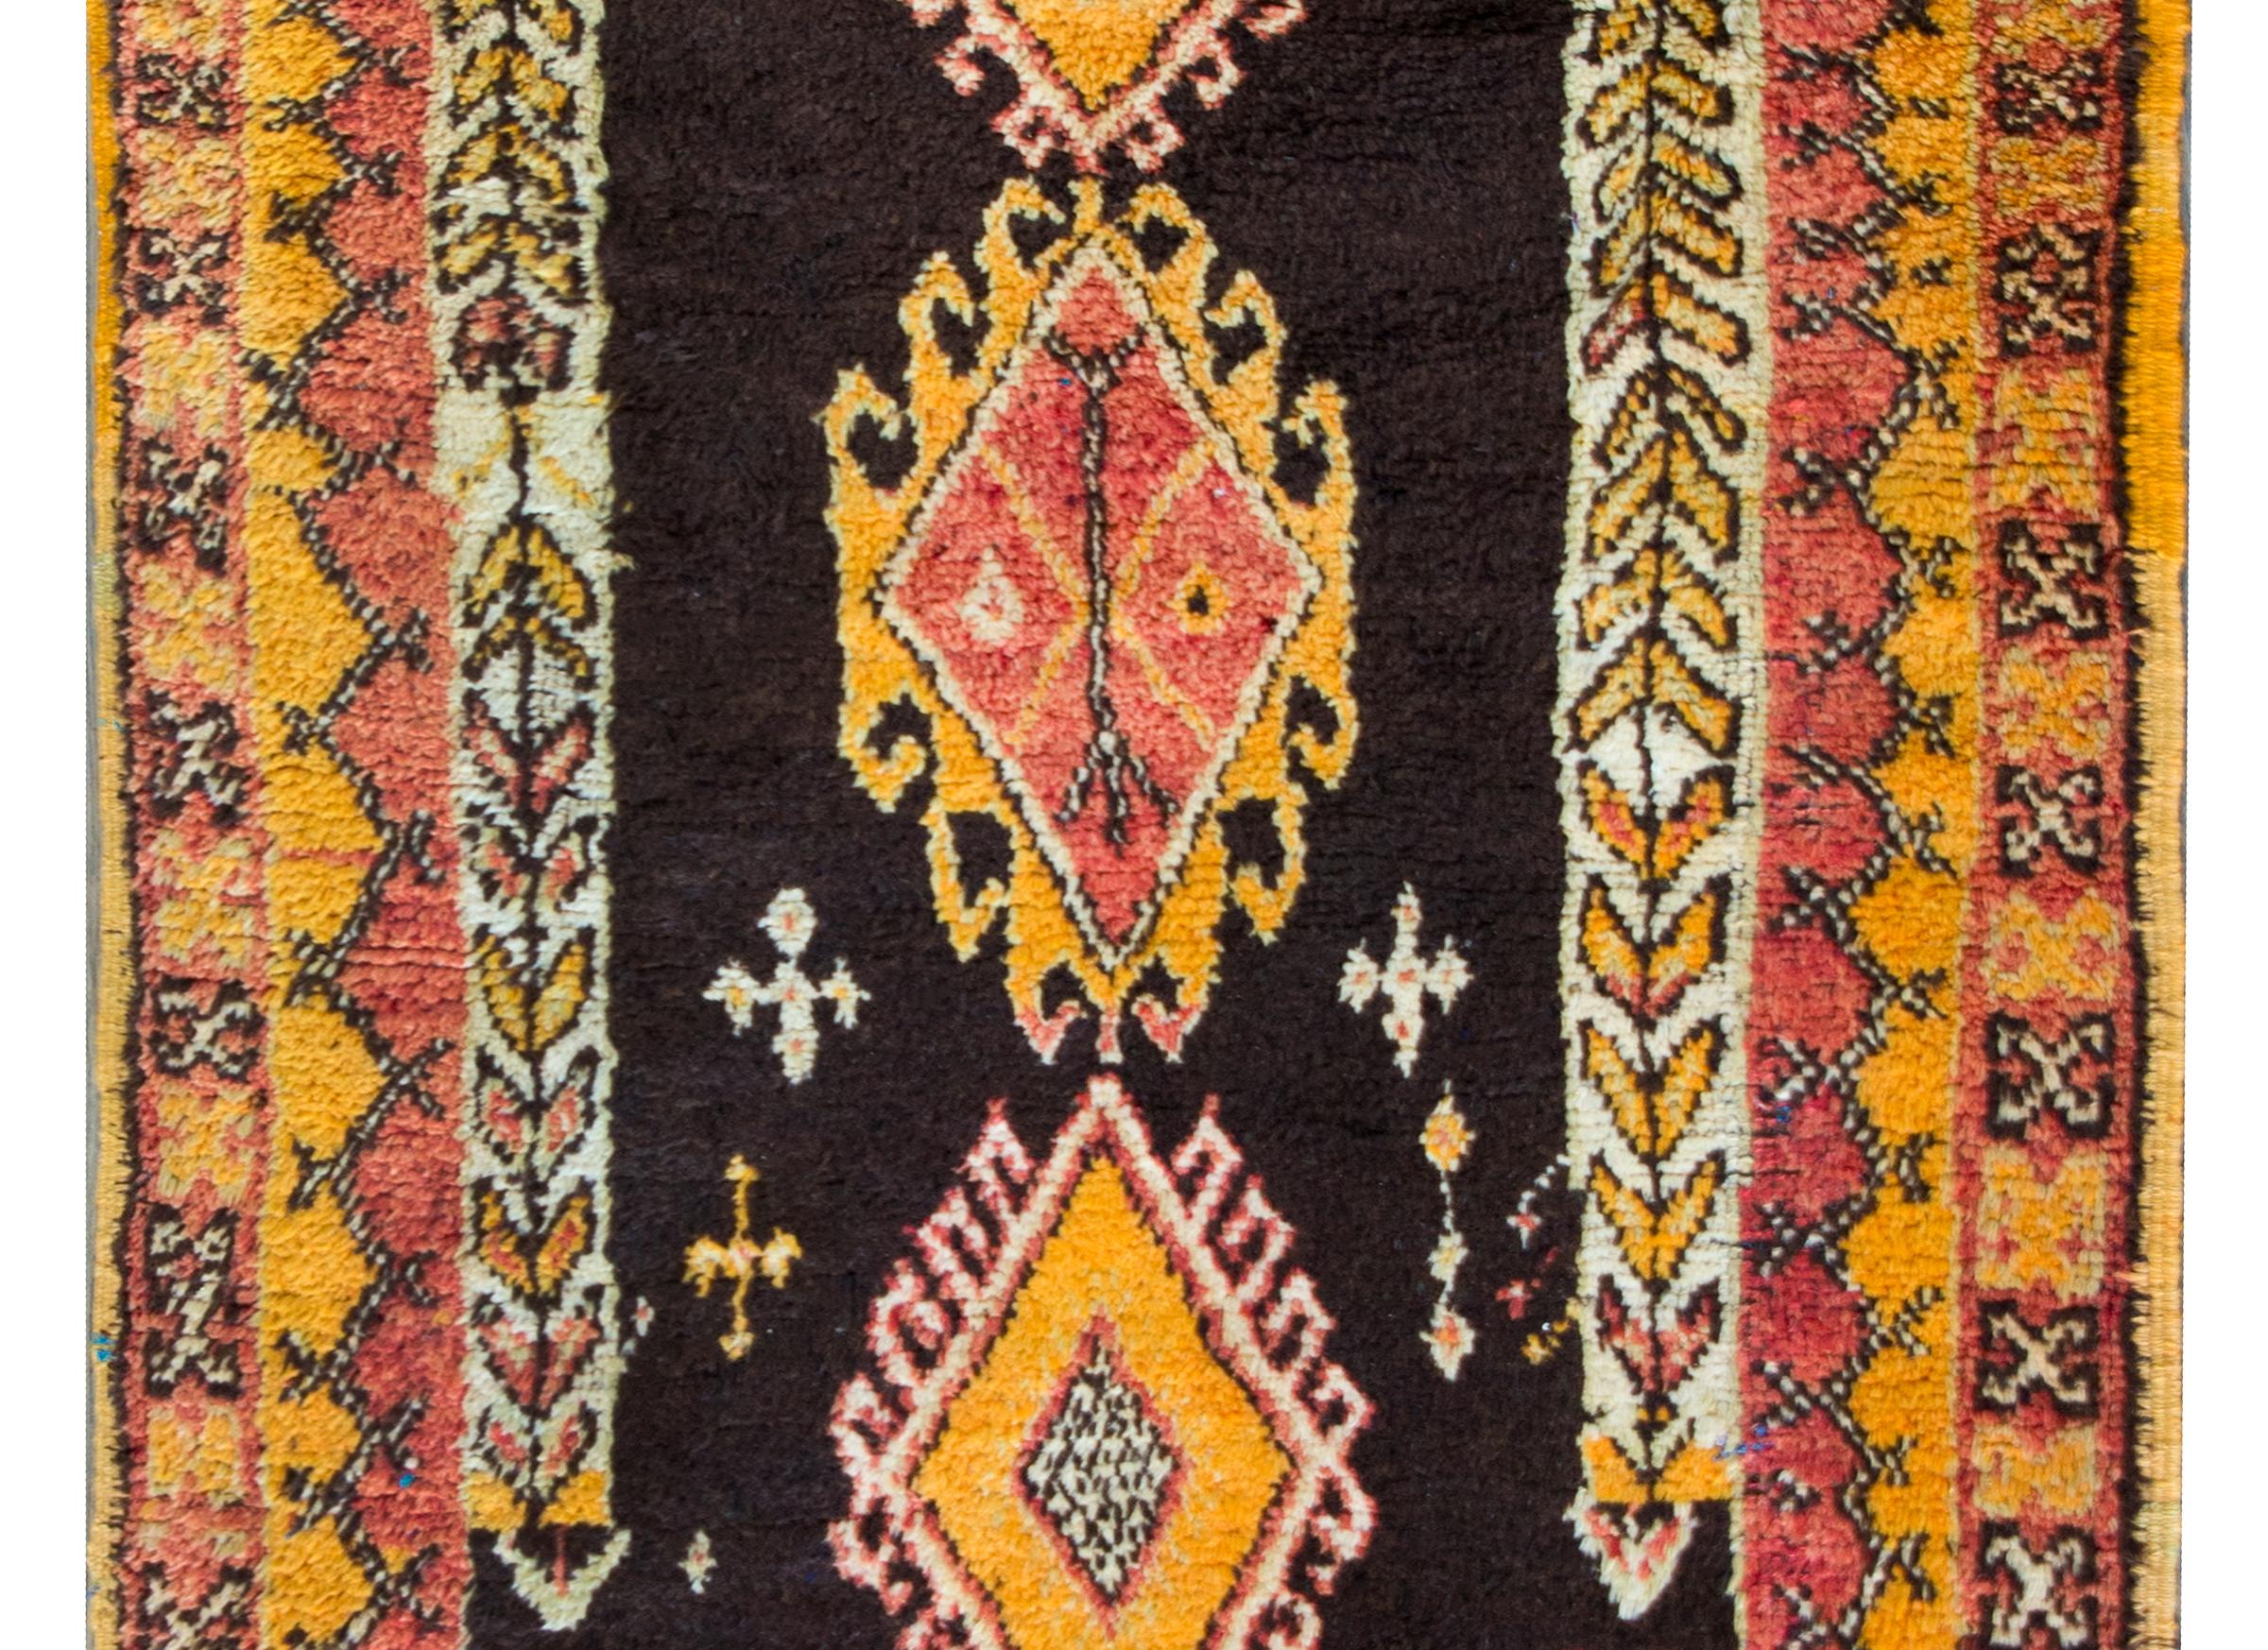 A wonderful mid-20th century Moroccan rug with three large central diamond medallions with stylized floral borders, set against a brown background, and all circled by a complex border with petite repeated geometric patterned stripes woven in